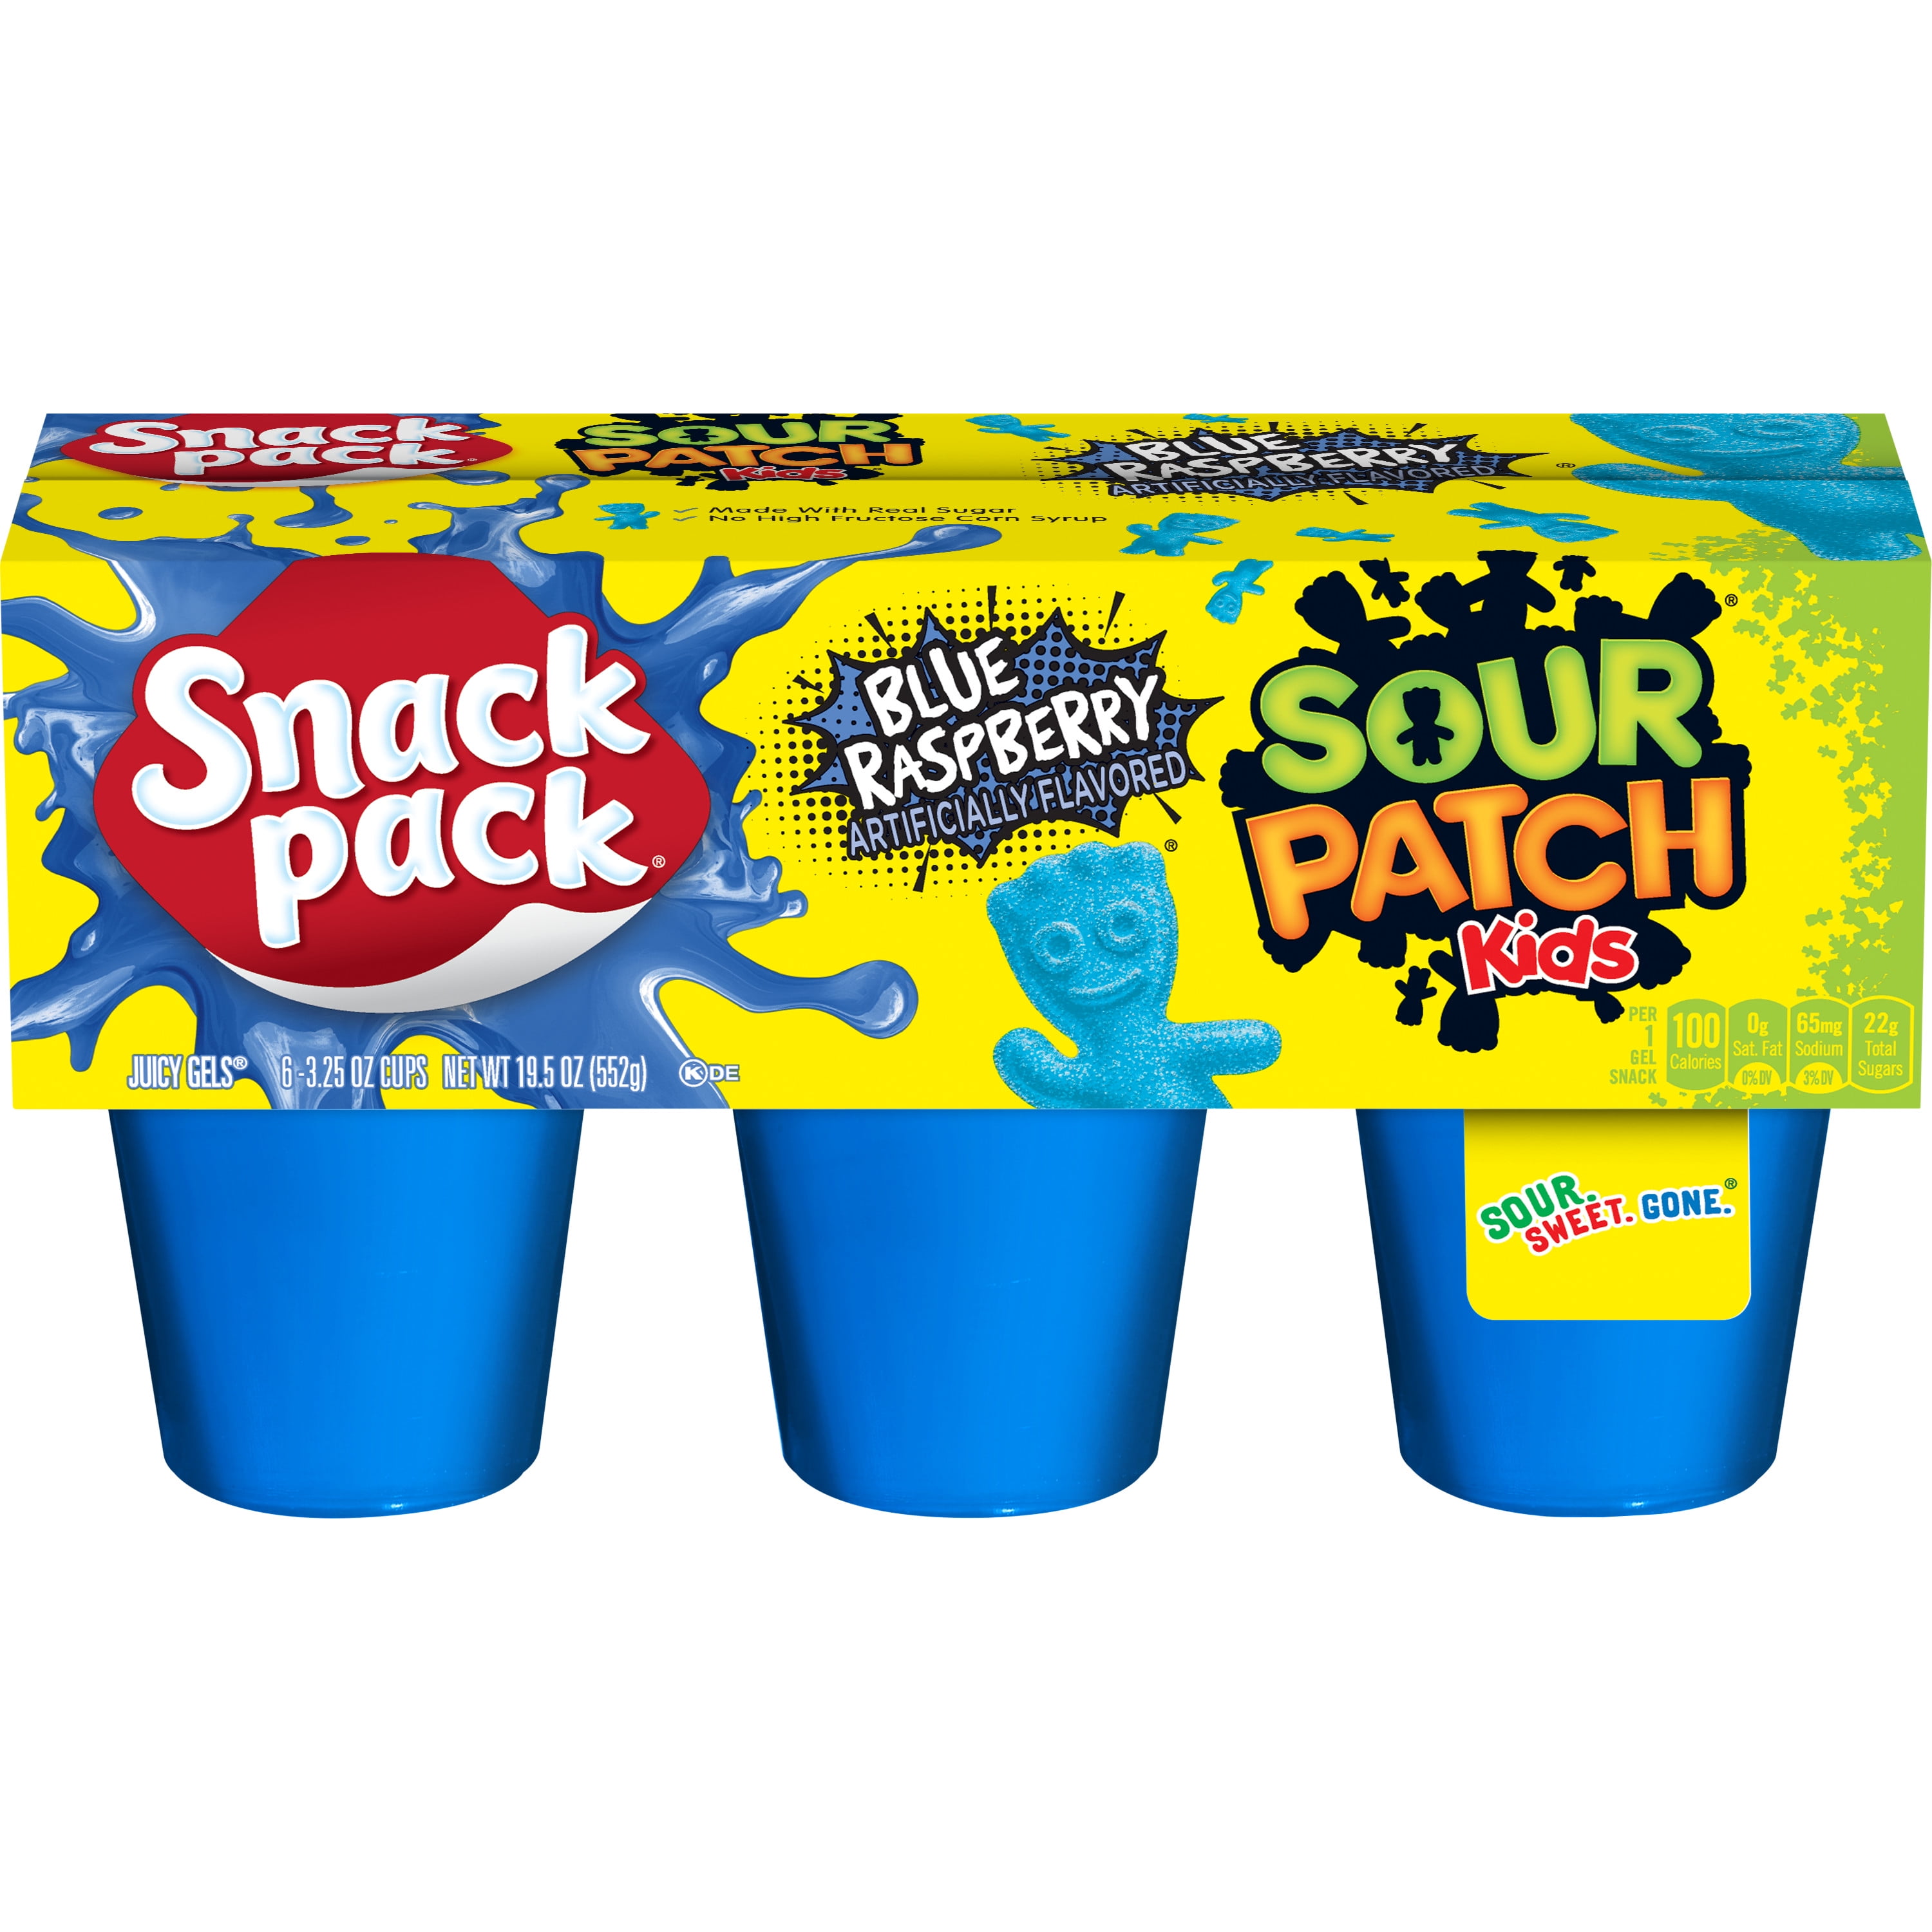 Snack Pack Sour Patch Kids Juicy Gels Blue Raspberry 325 Oz 6 Count